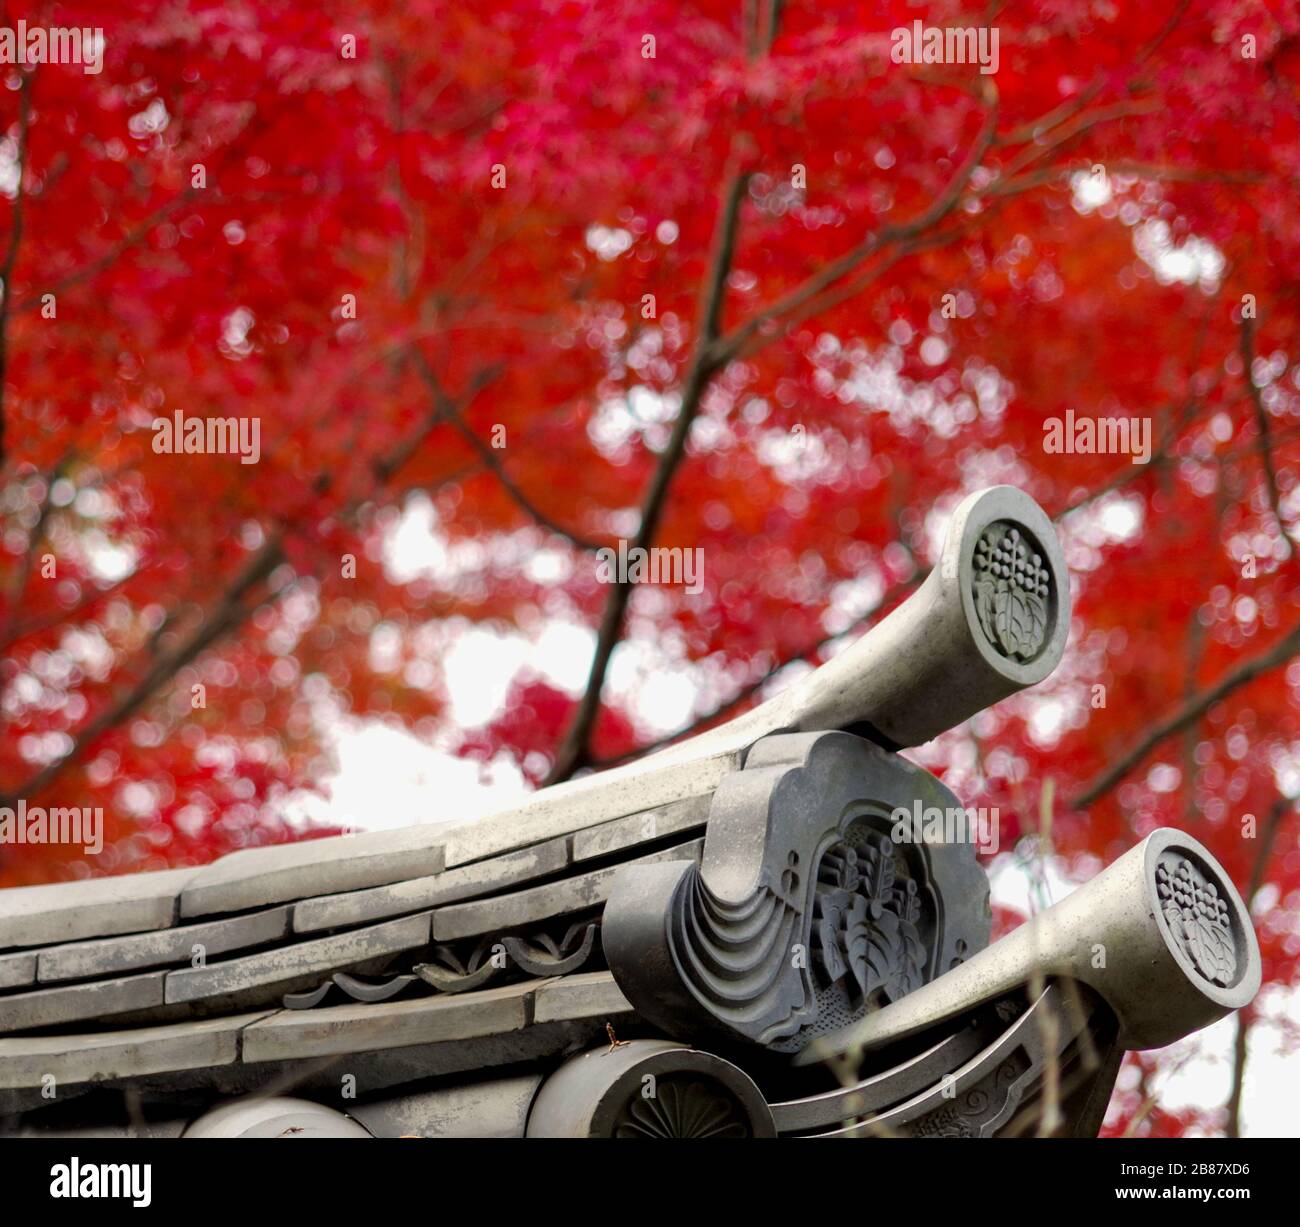 Roof tiles and eave-end tiles with circular pendants showing a family crest on the roof of a structure built in 1591 in  Kyoto and moved to Yokohama 1 Stock Photo